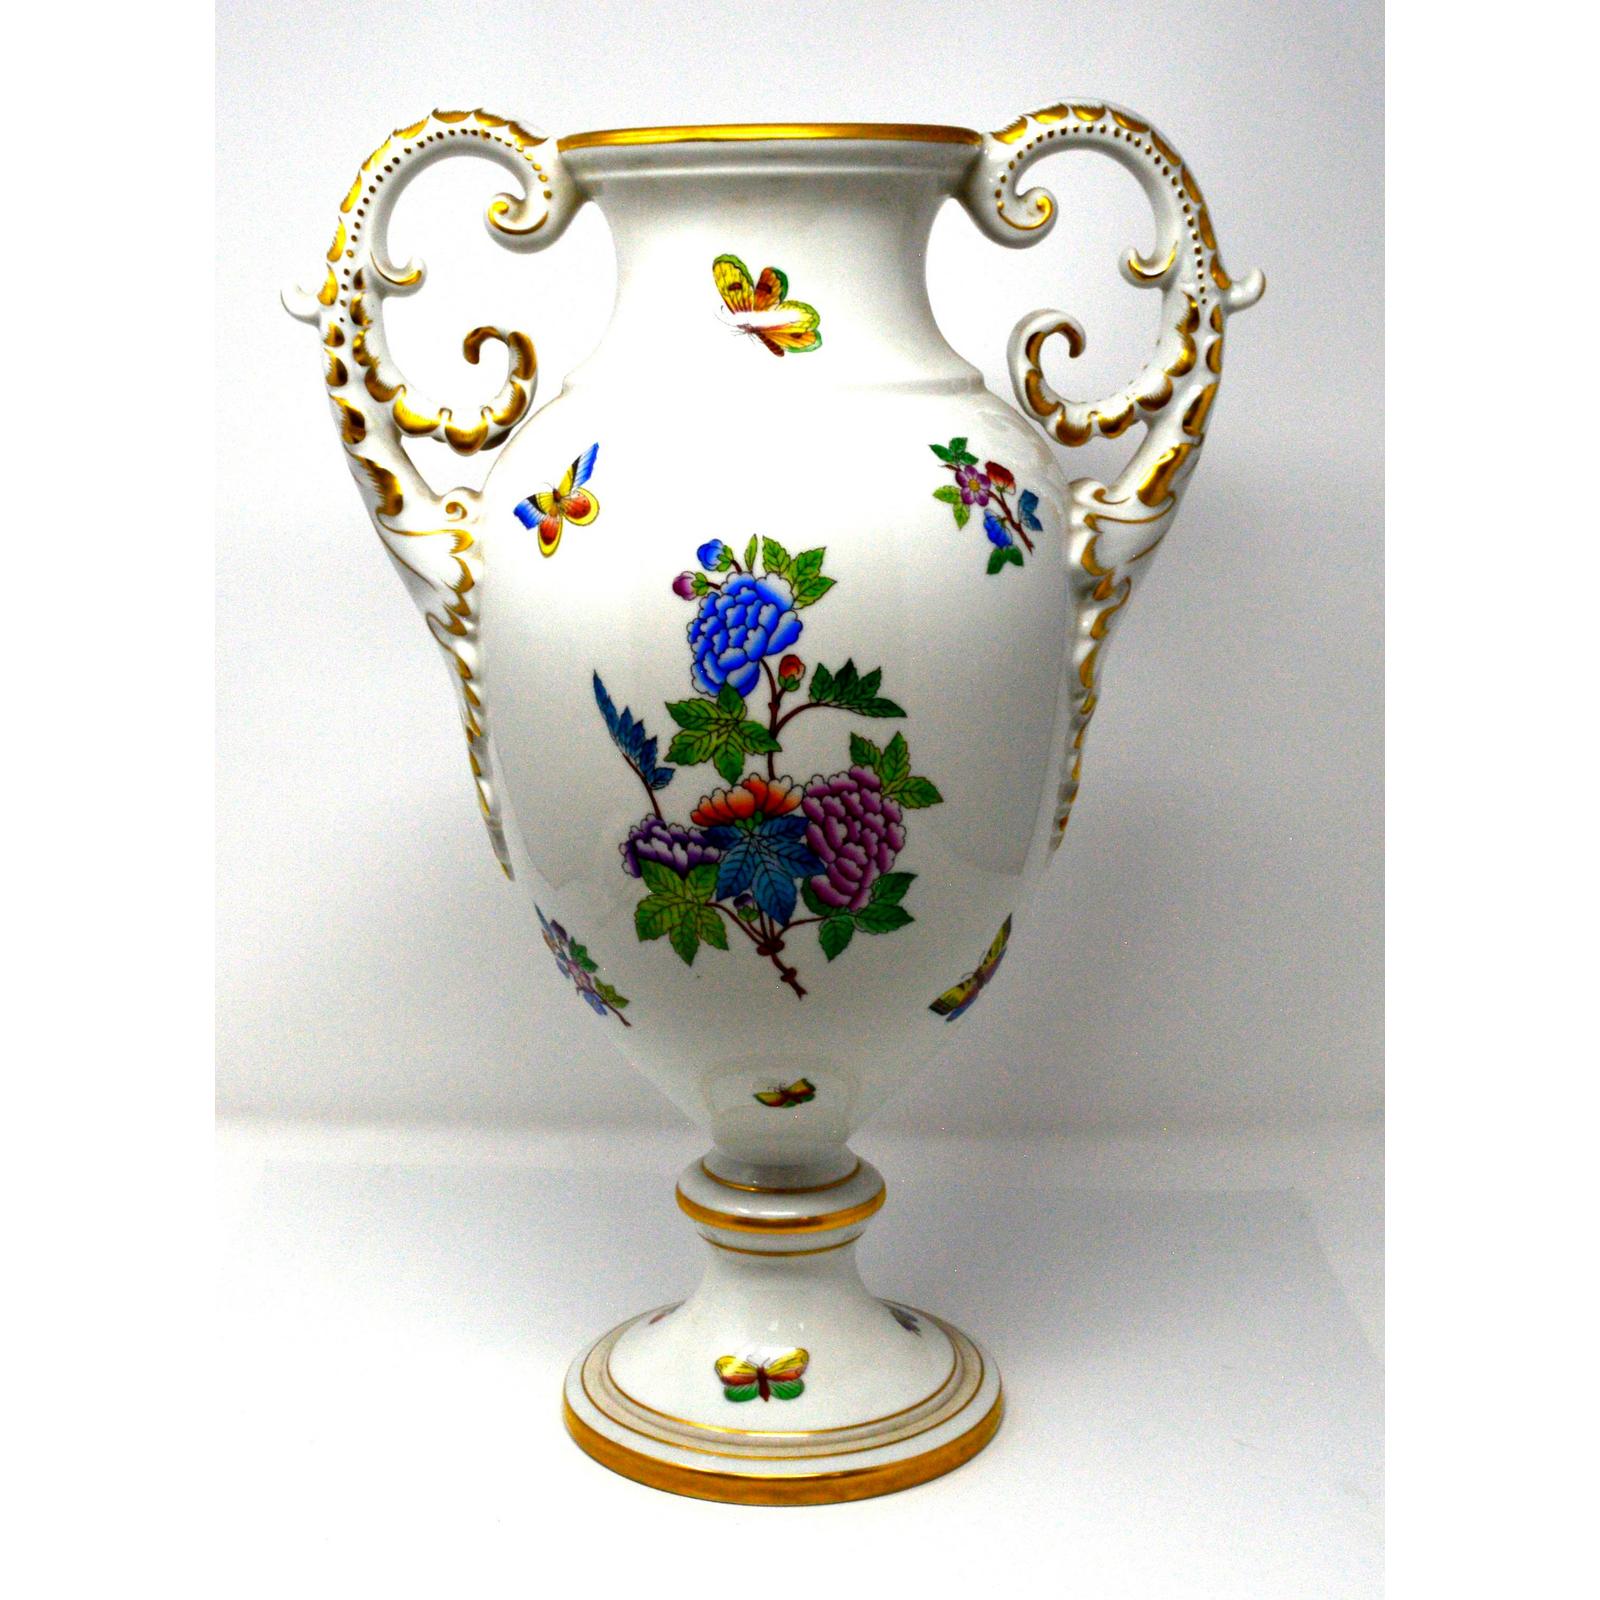 HEREND, (HUNGARY) HAND PAINTED & GILDED PORCELAIN URN | Empire